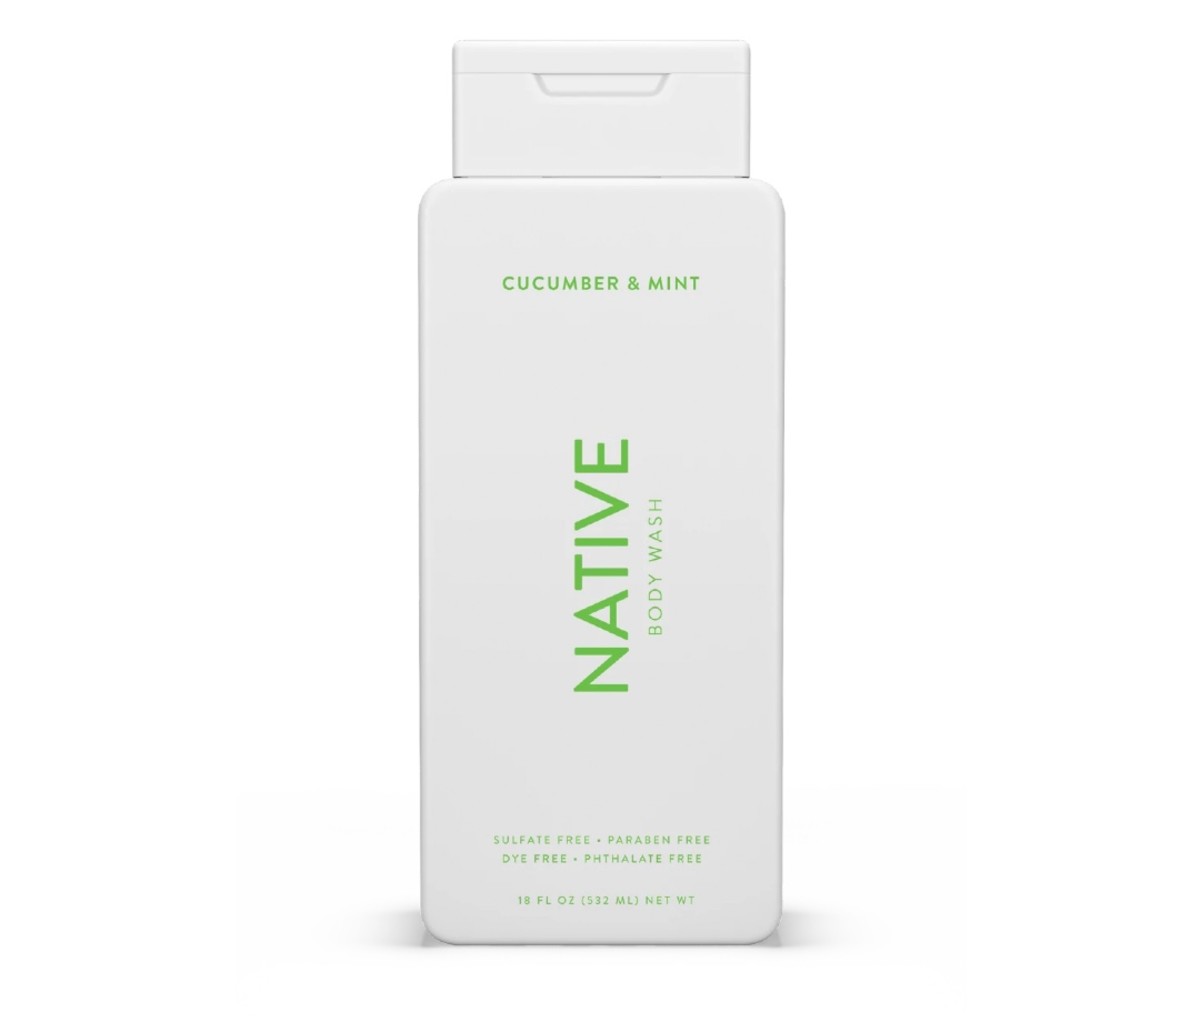 Native & # 39; s cucumber and mint body wash